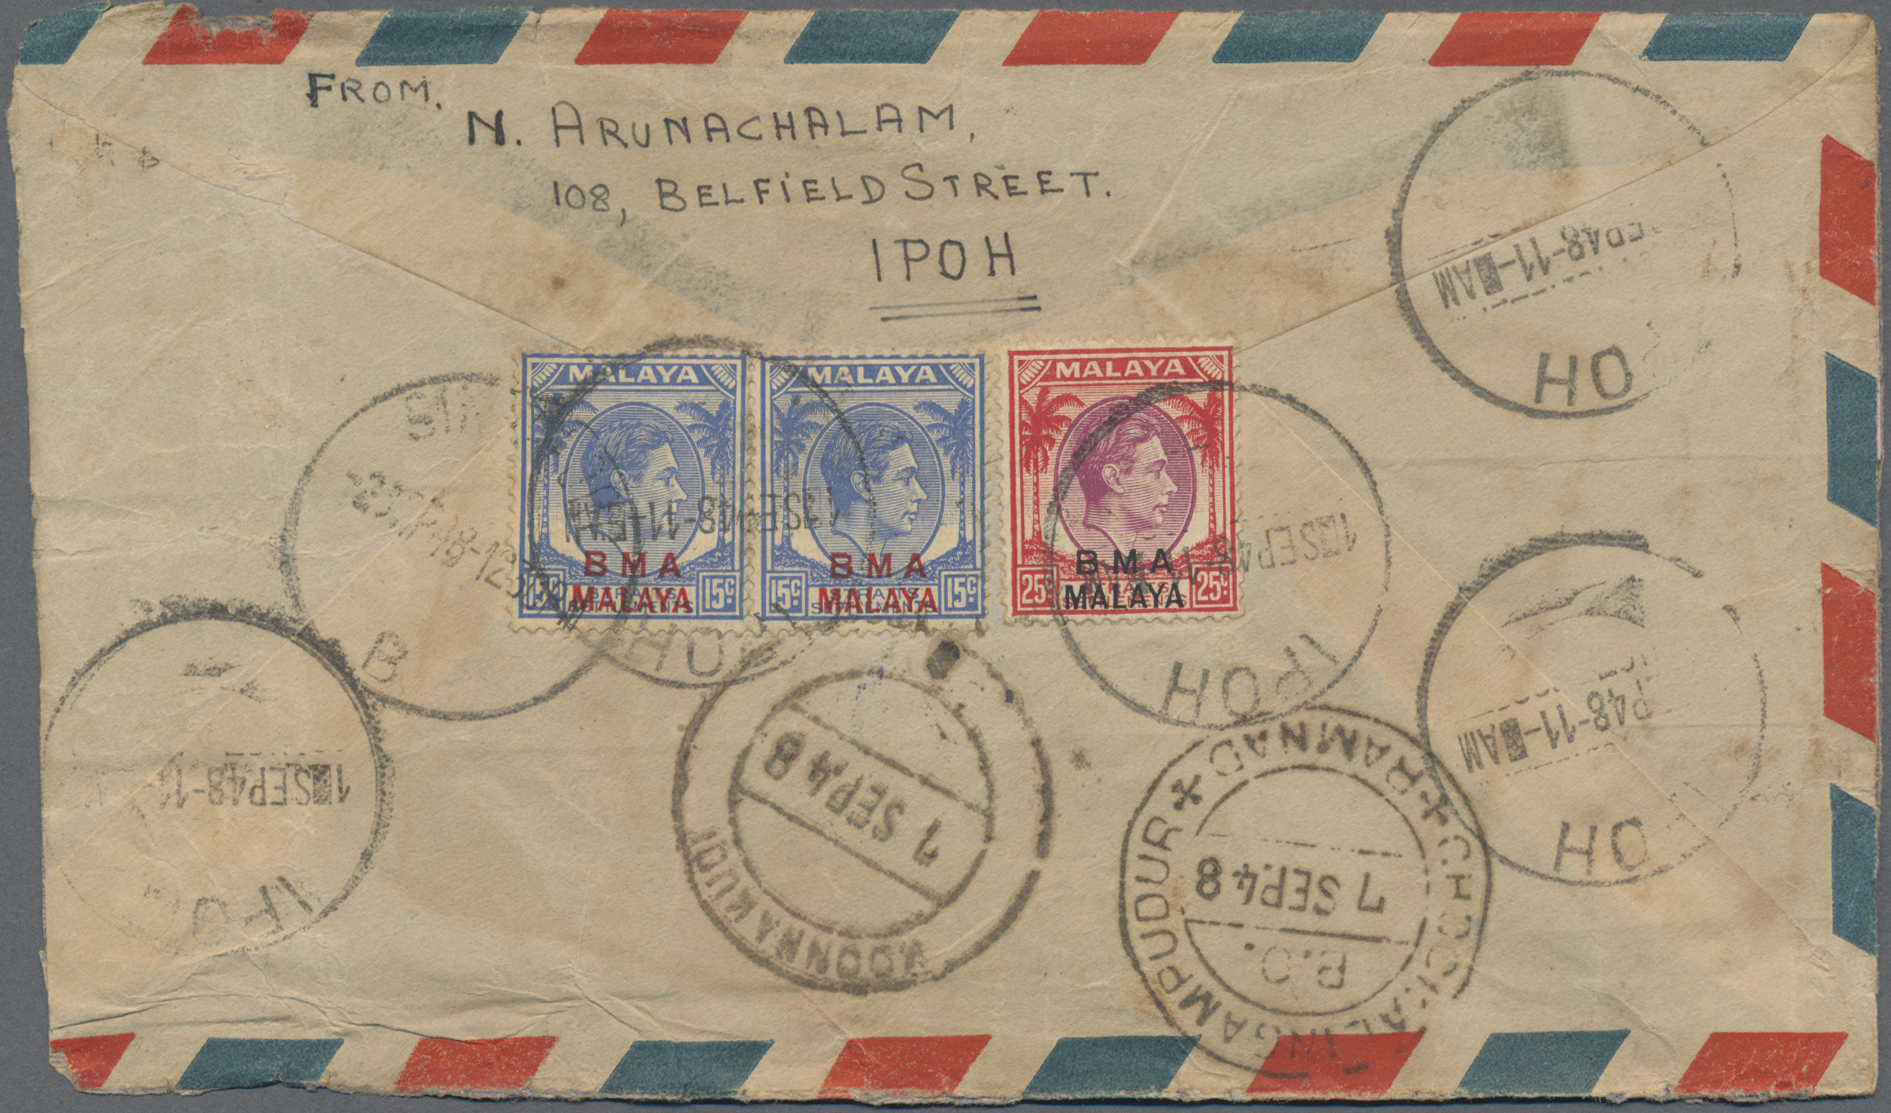 Lot 34720 - Malaiische Staaten - Perak  -  Auktionshaus Christoph Gärtner GmbH & Co. KG Sale #44 Collections Germany